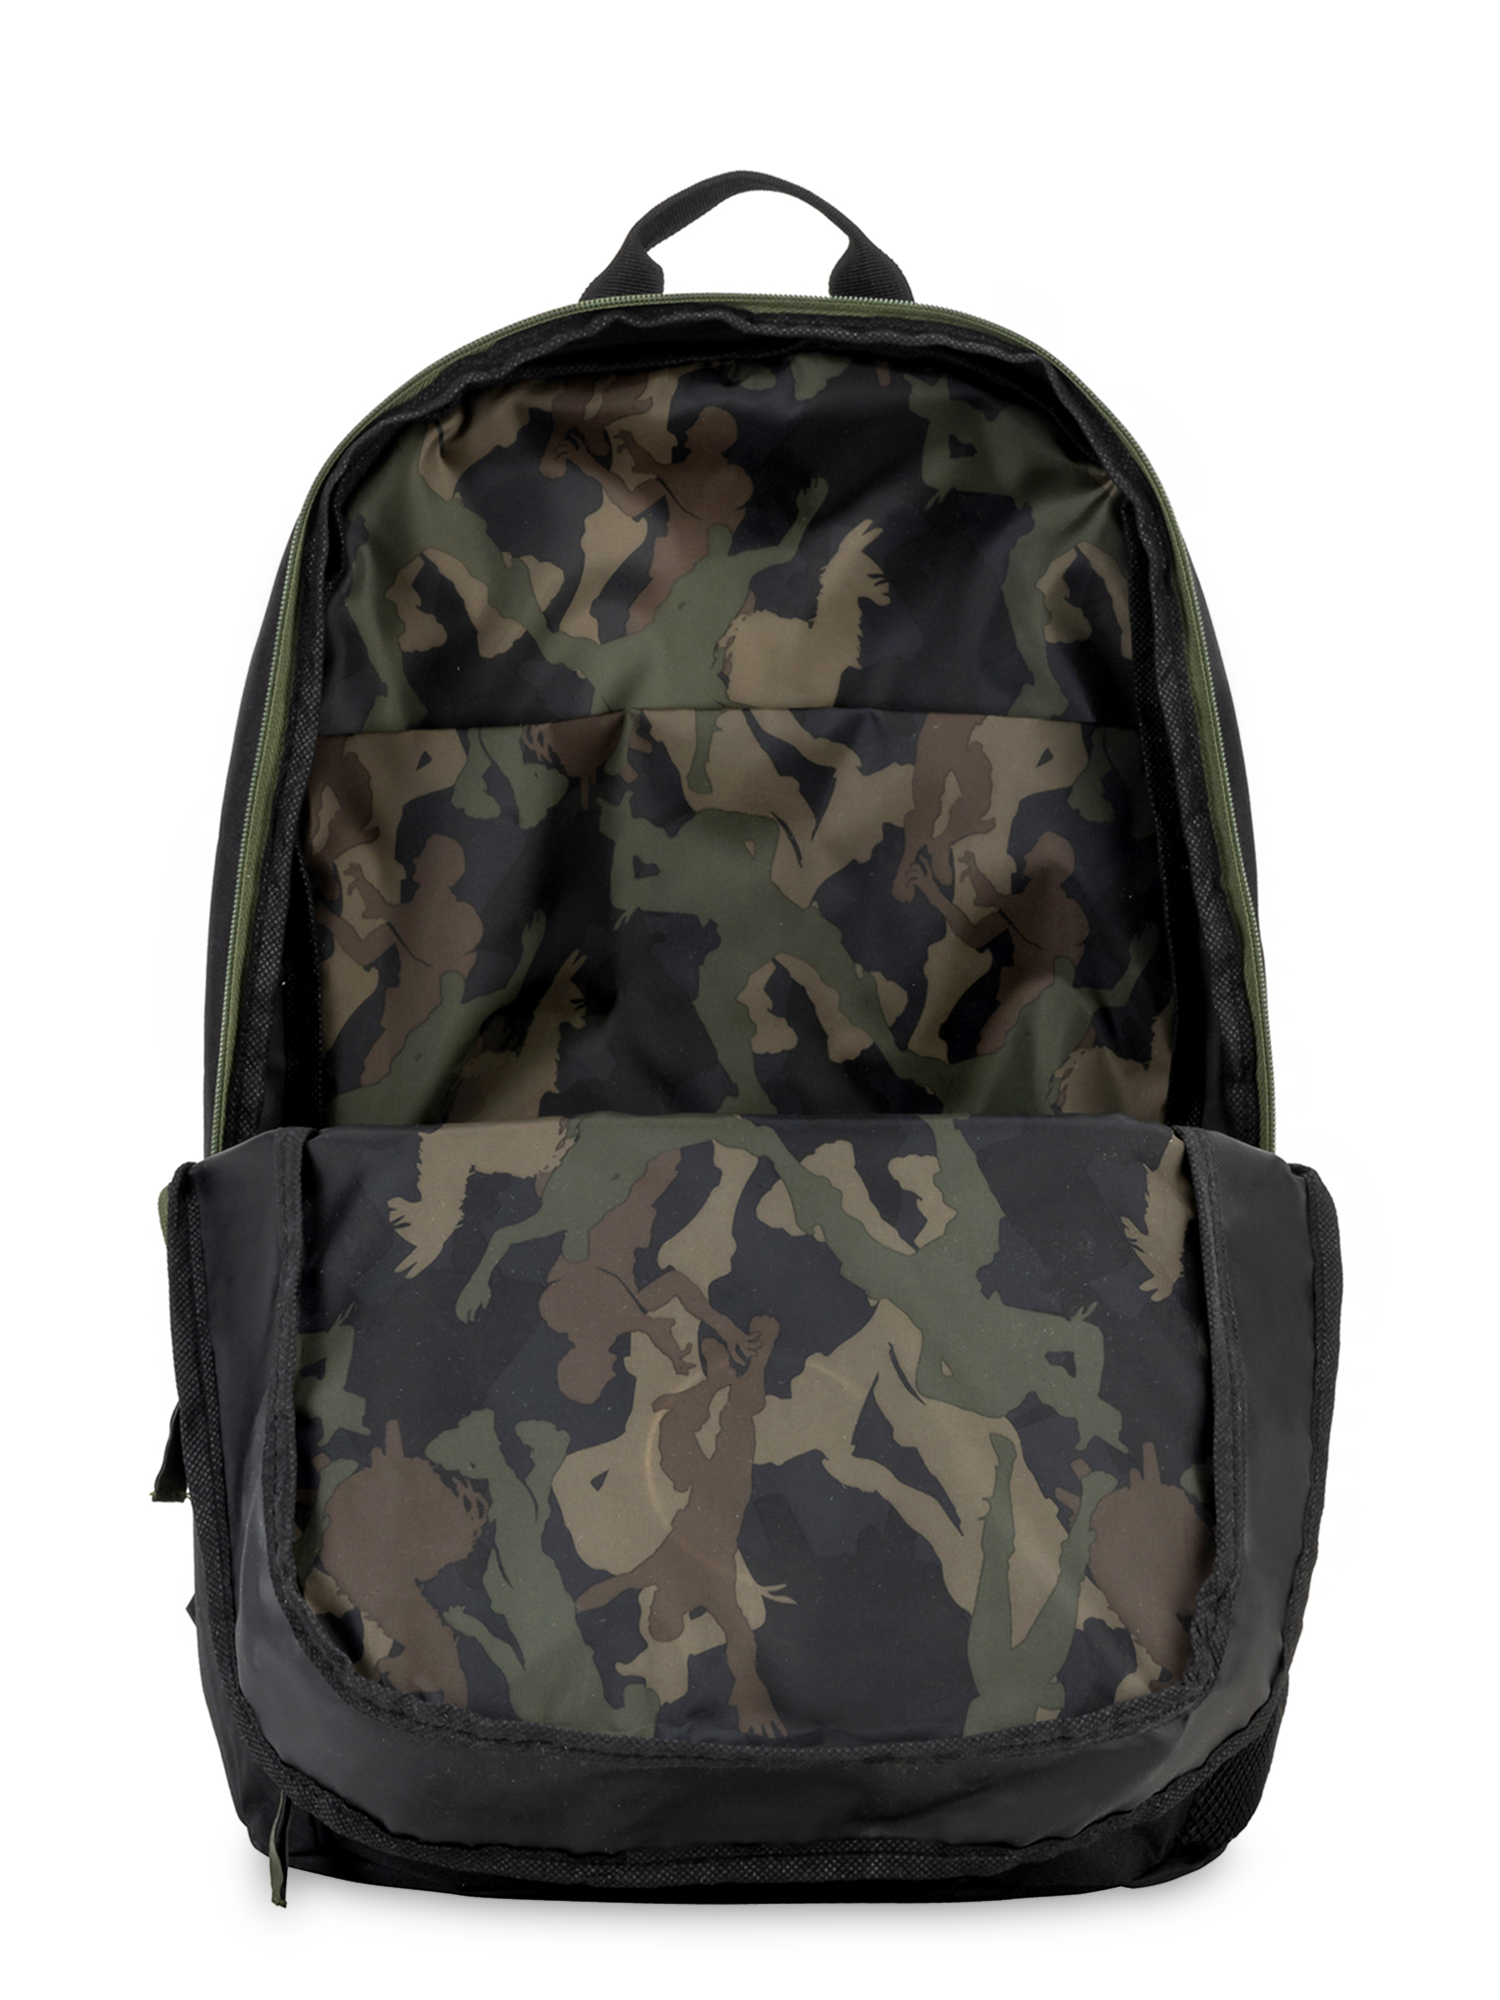 Fortnite Solidify Backpack - image 4 of 4